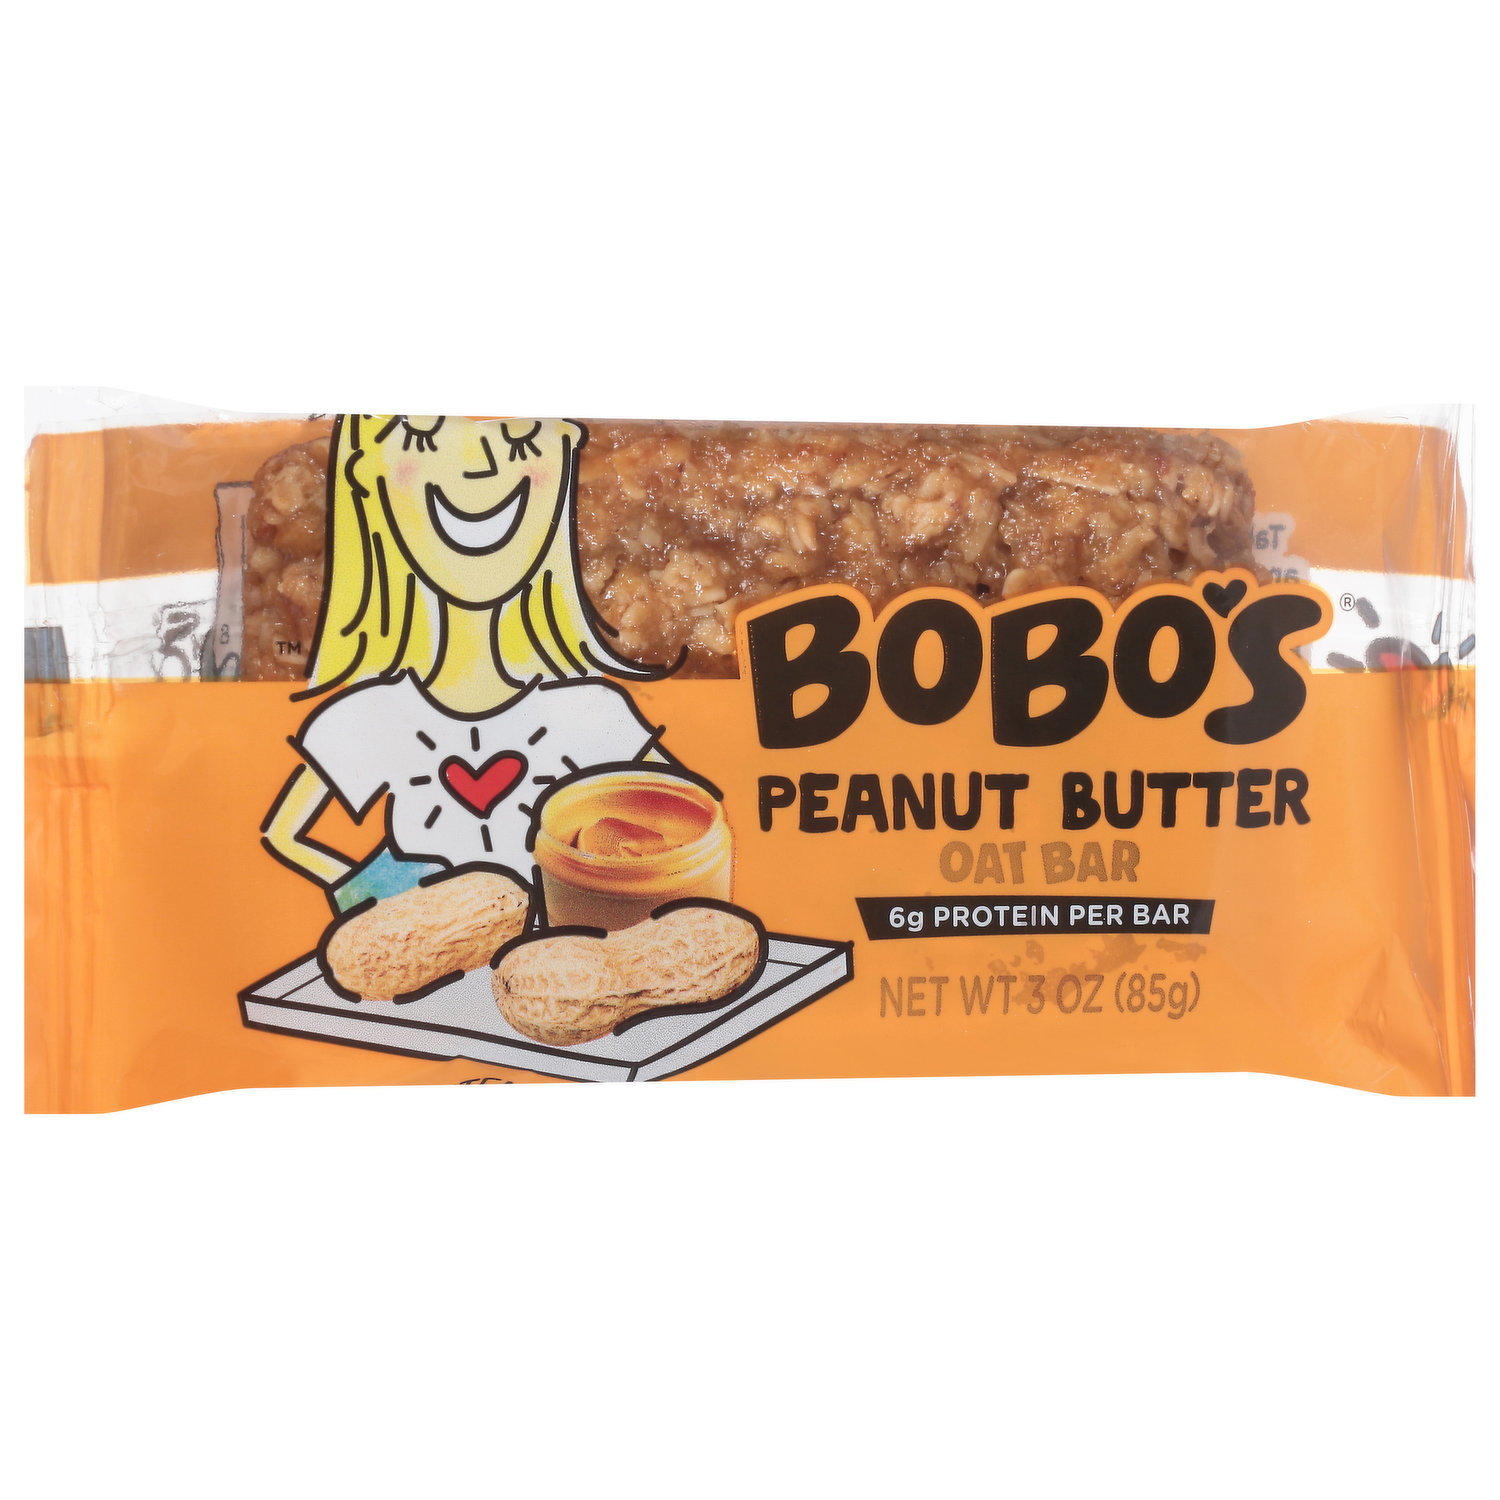 Peanut Butter Chocolate Chip Protein Bar – Bobo's